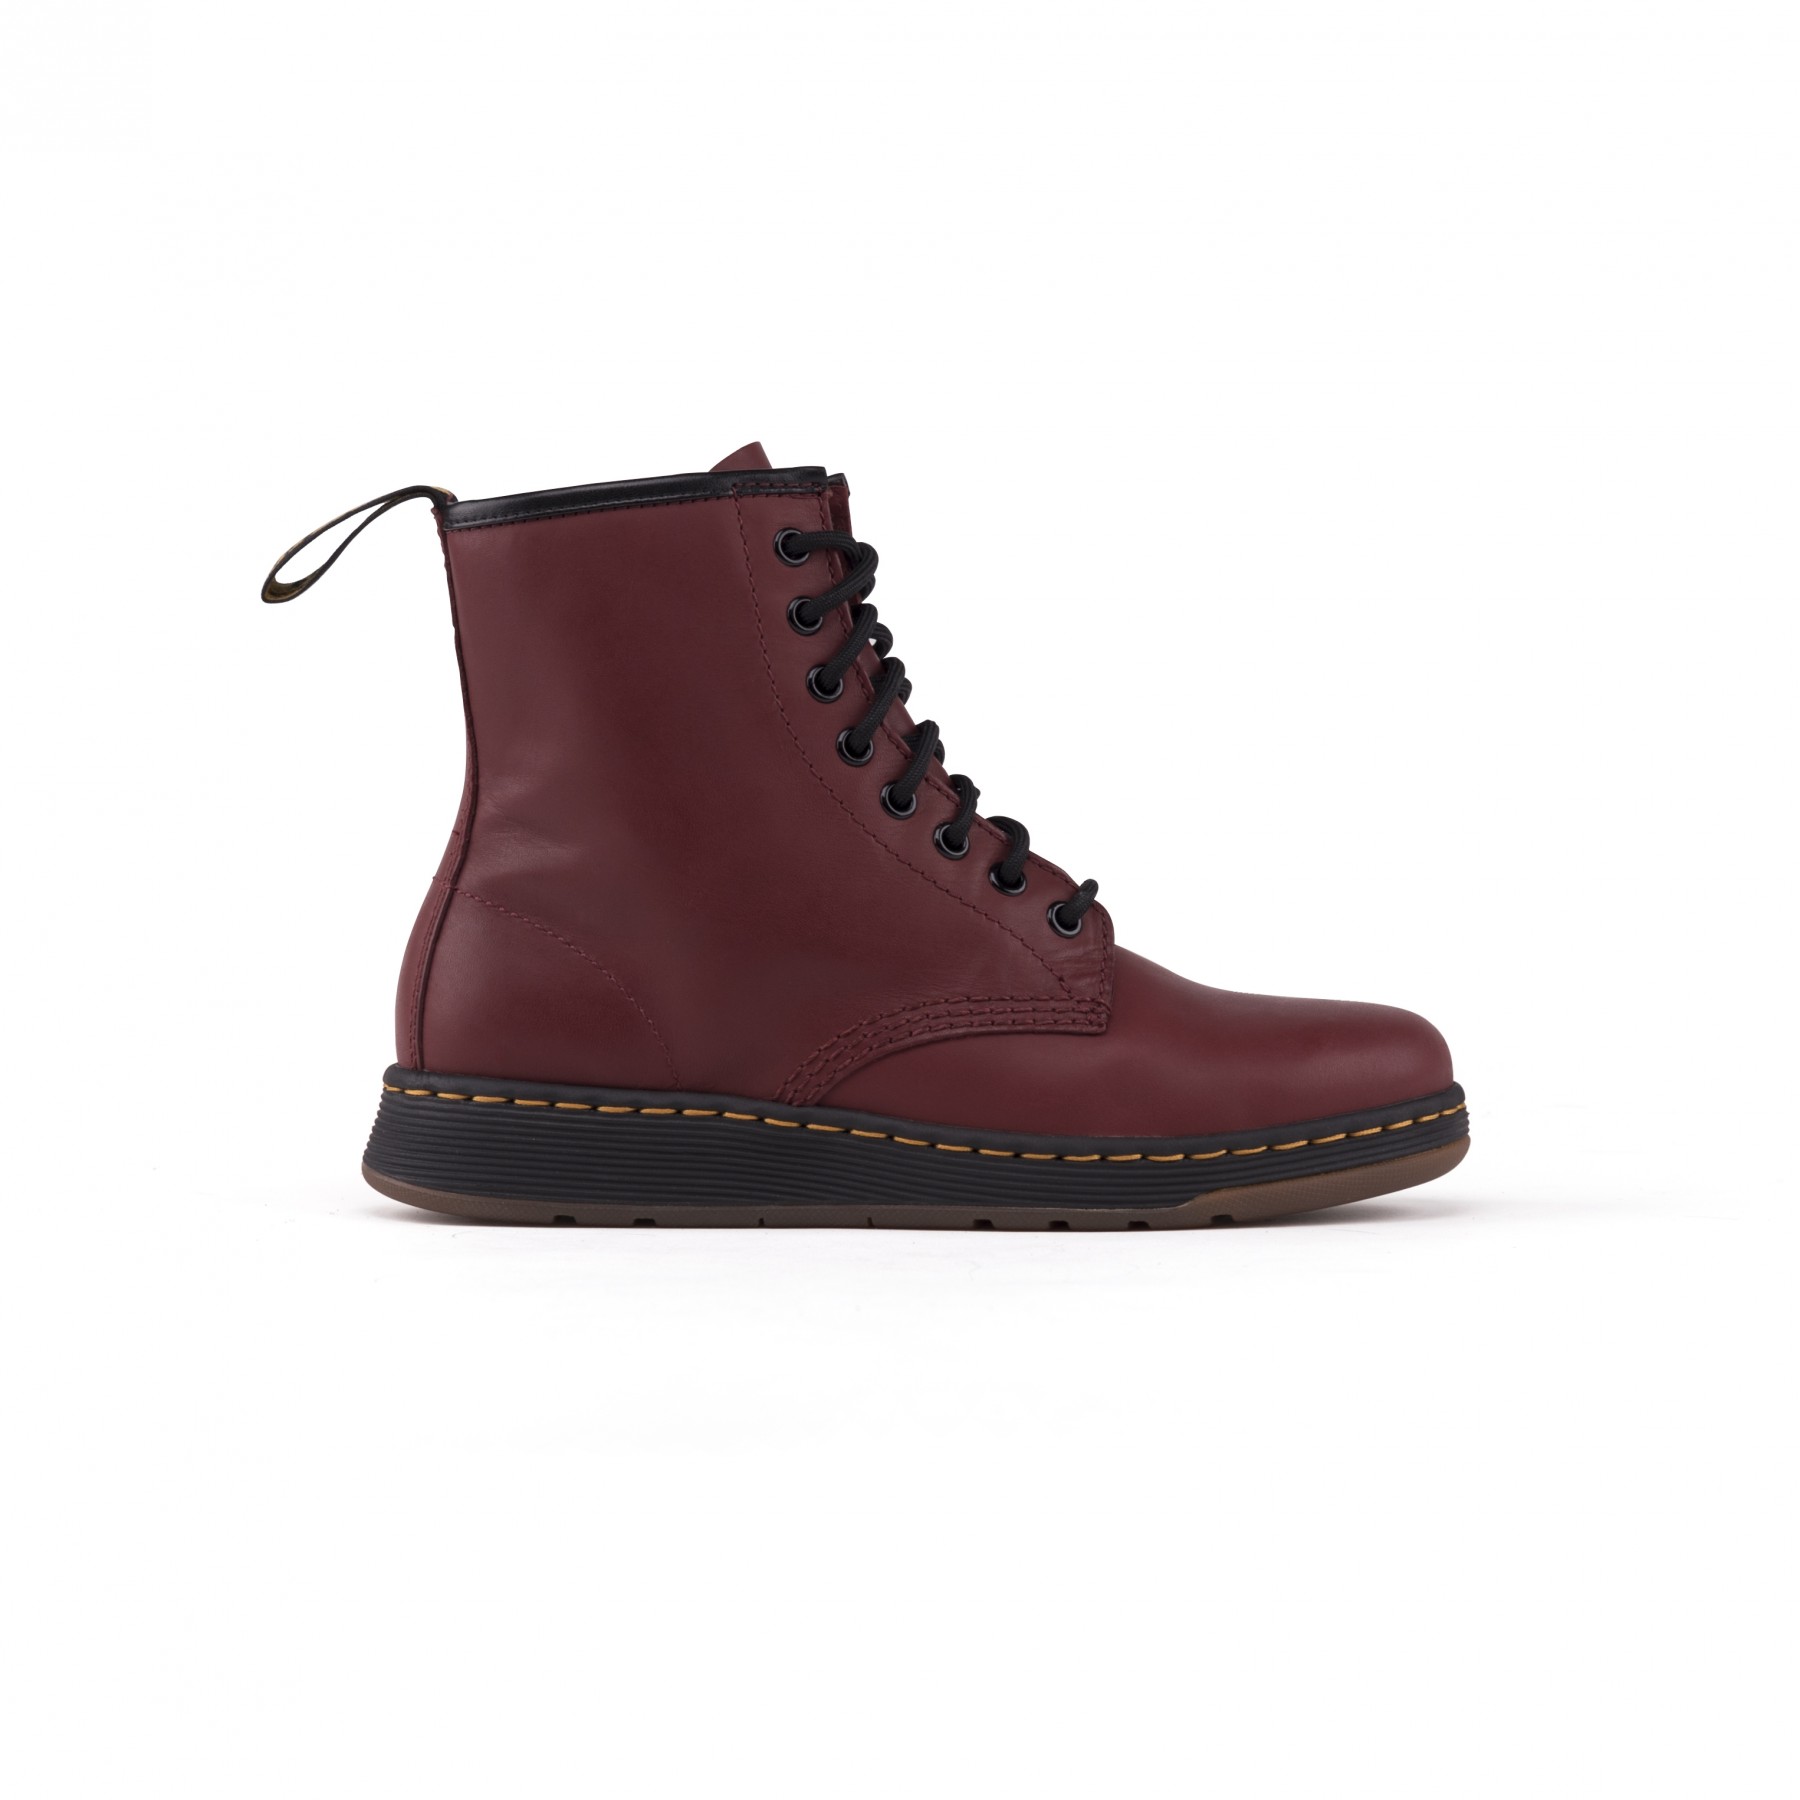  Dr. Martens 1460 Smooth Cherry Red 10072600